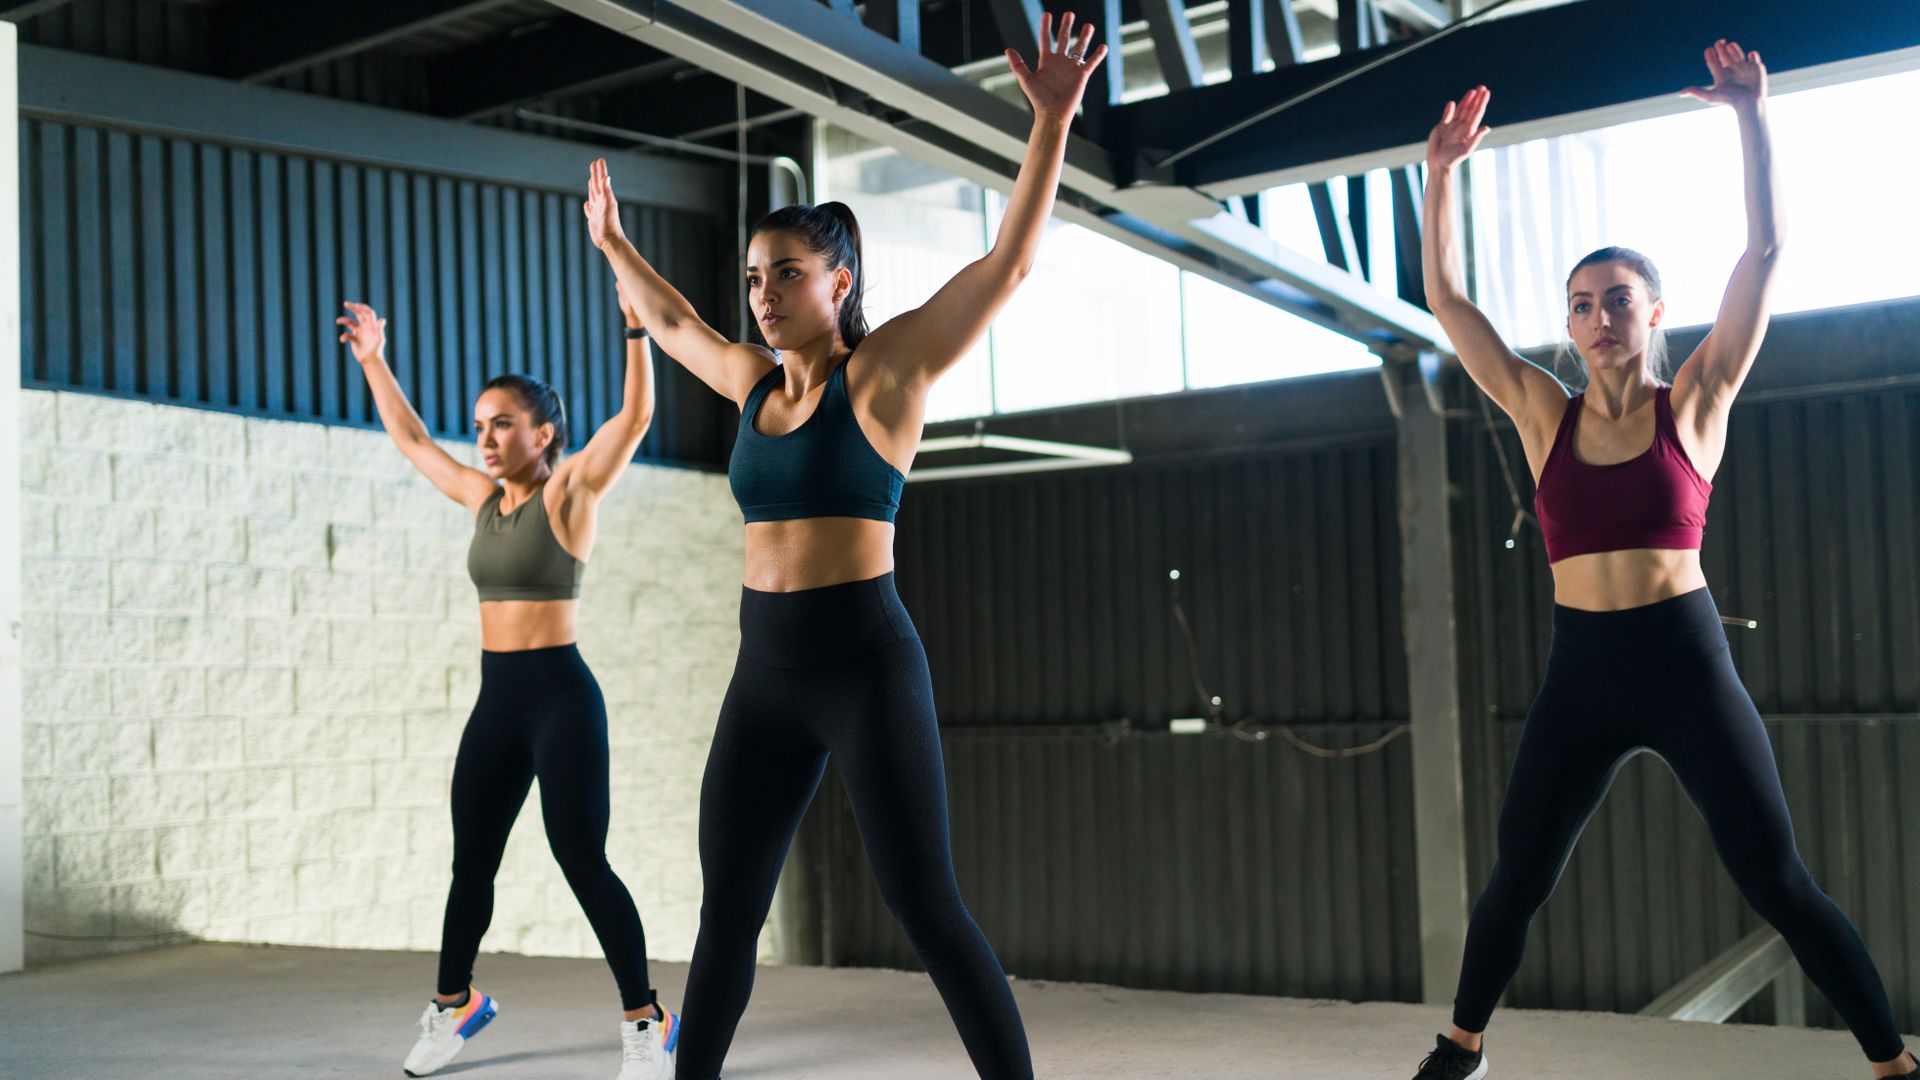 The Beginners Guide To Hiit How To Start High Intensity Interval